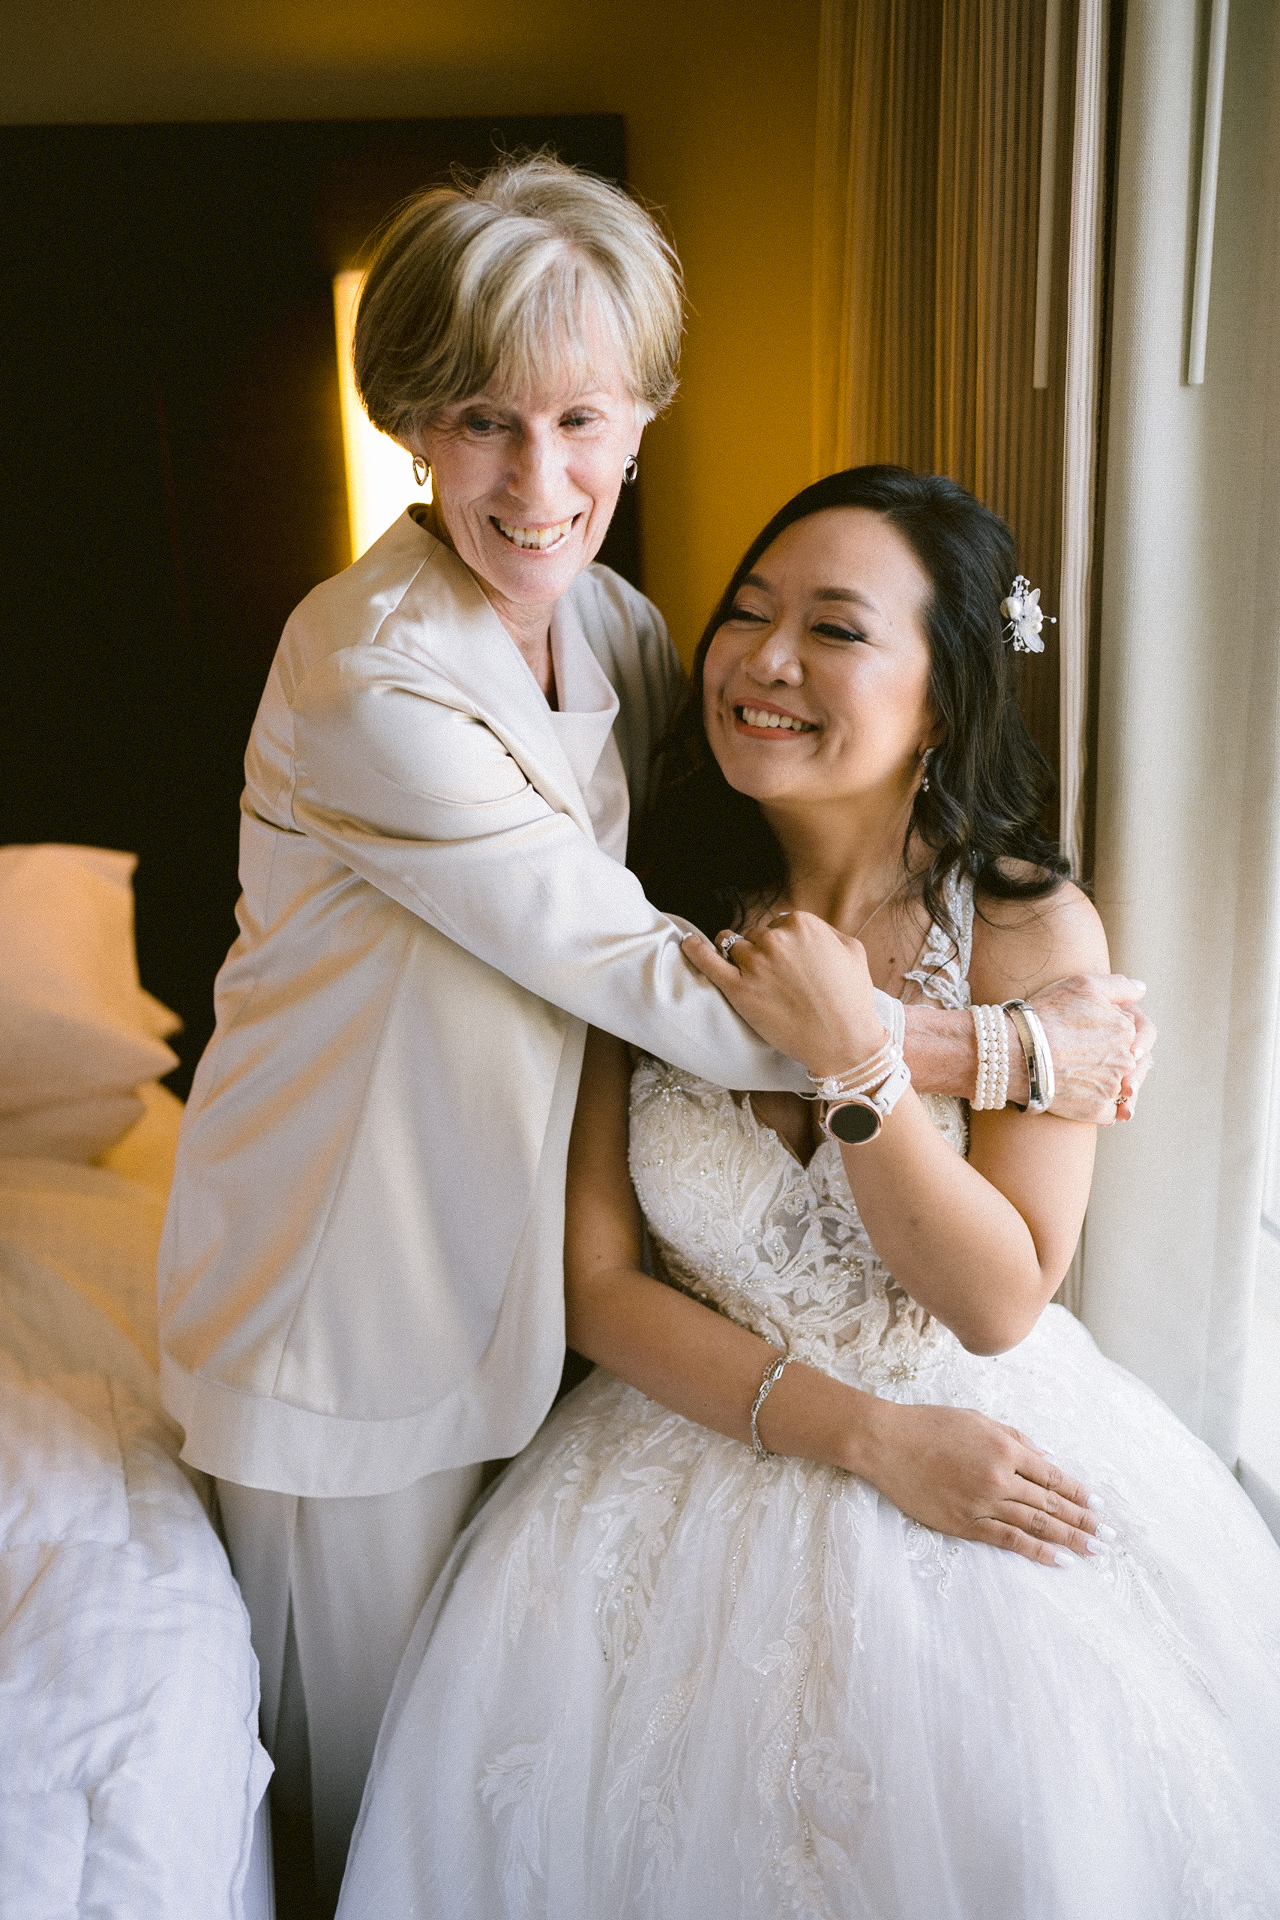 Two women embracing happily, one in a bridal gown and the other in formal attire.